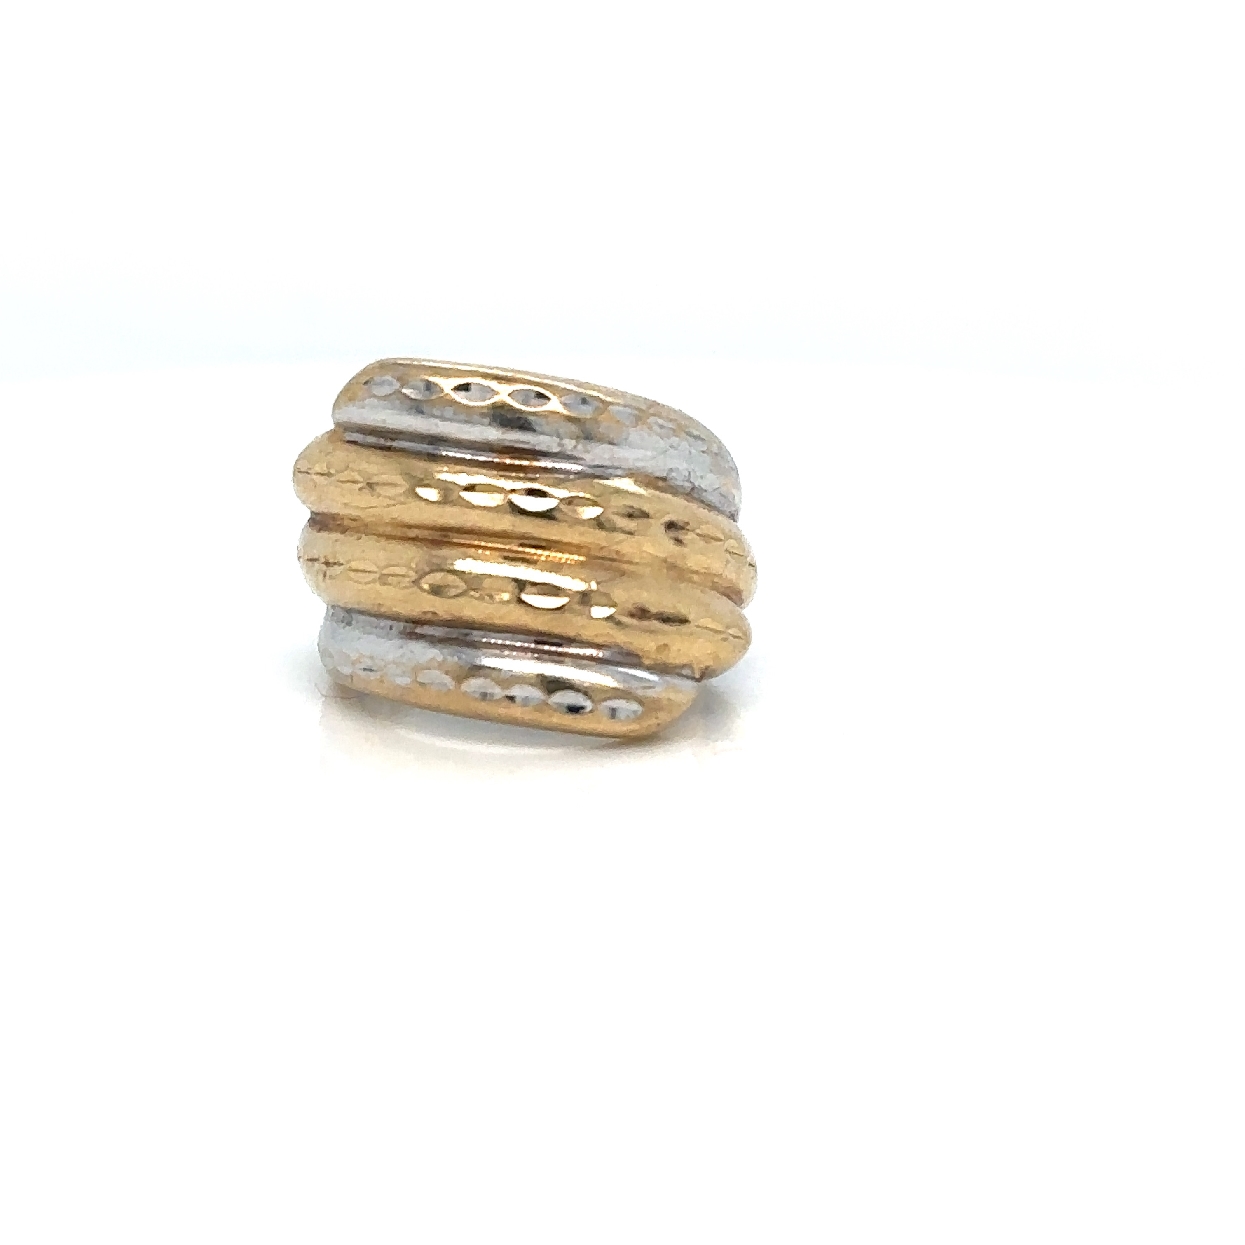 10K Yellow and Gold Textured Bypass Ring

Size 7